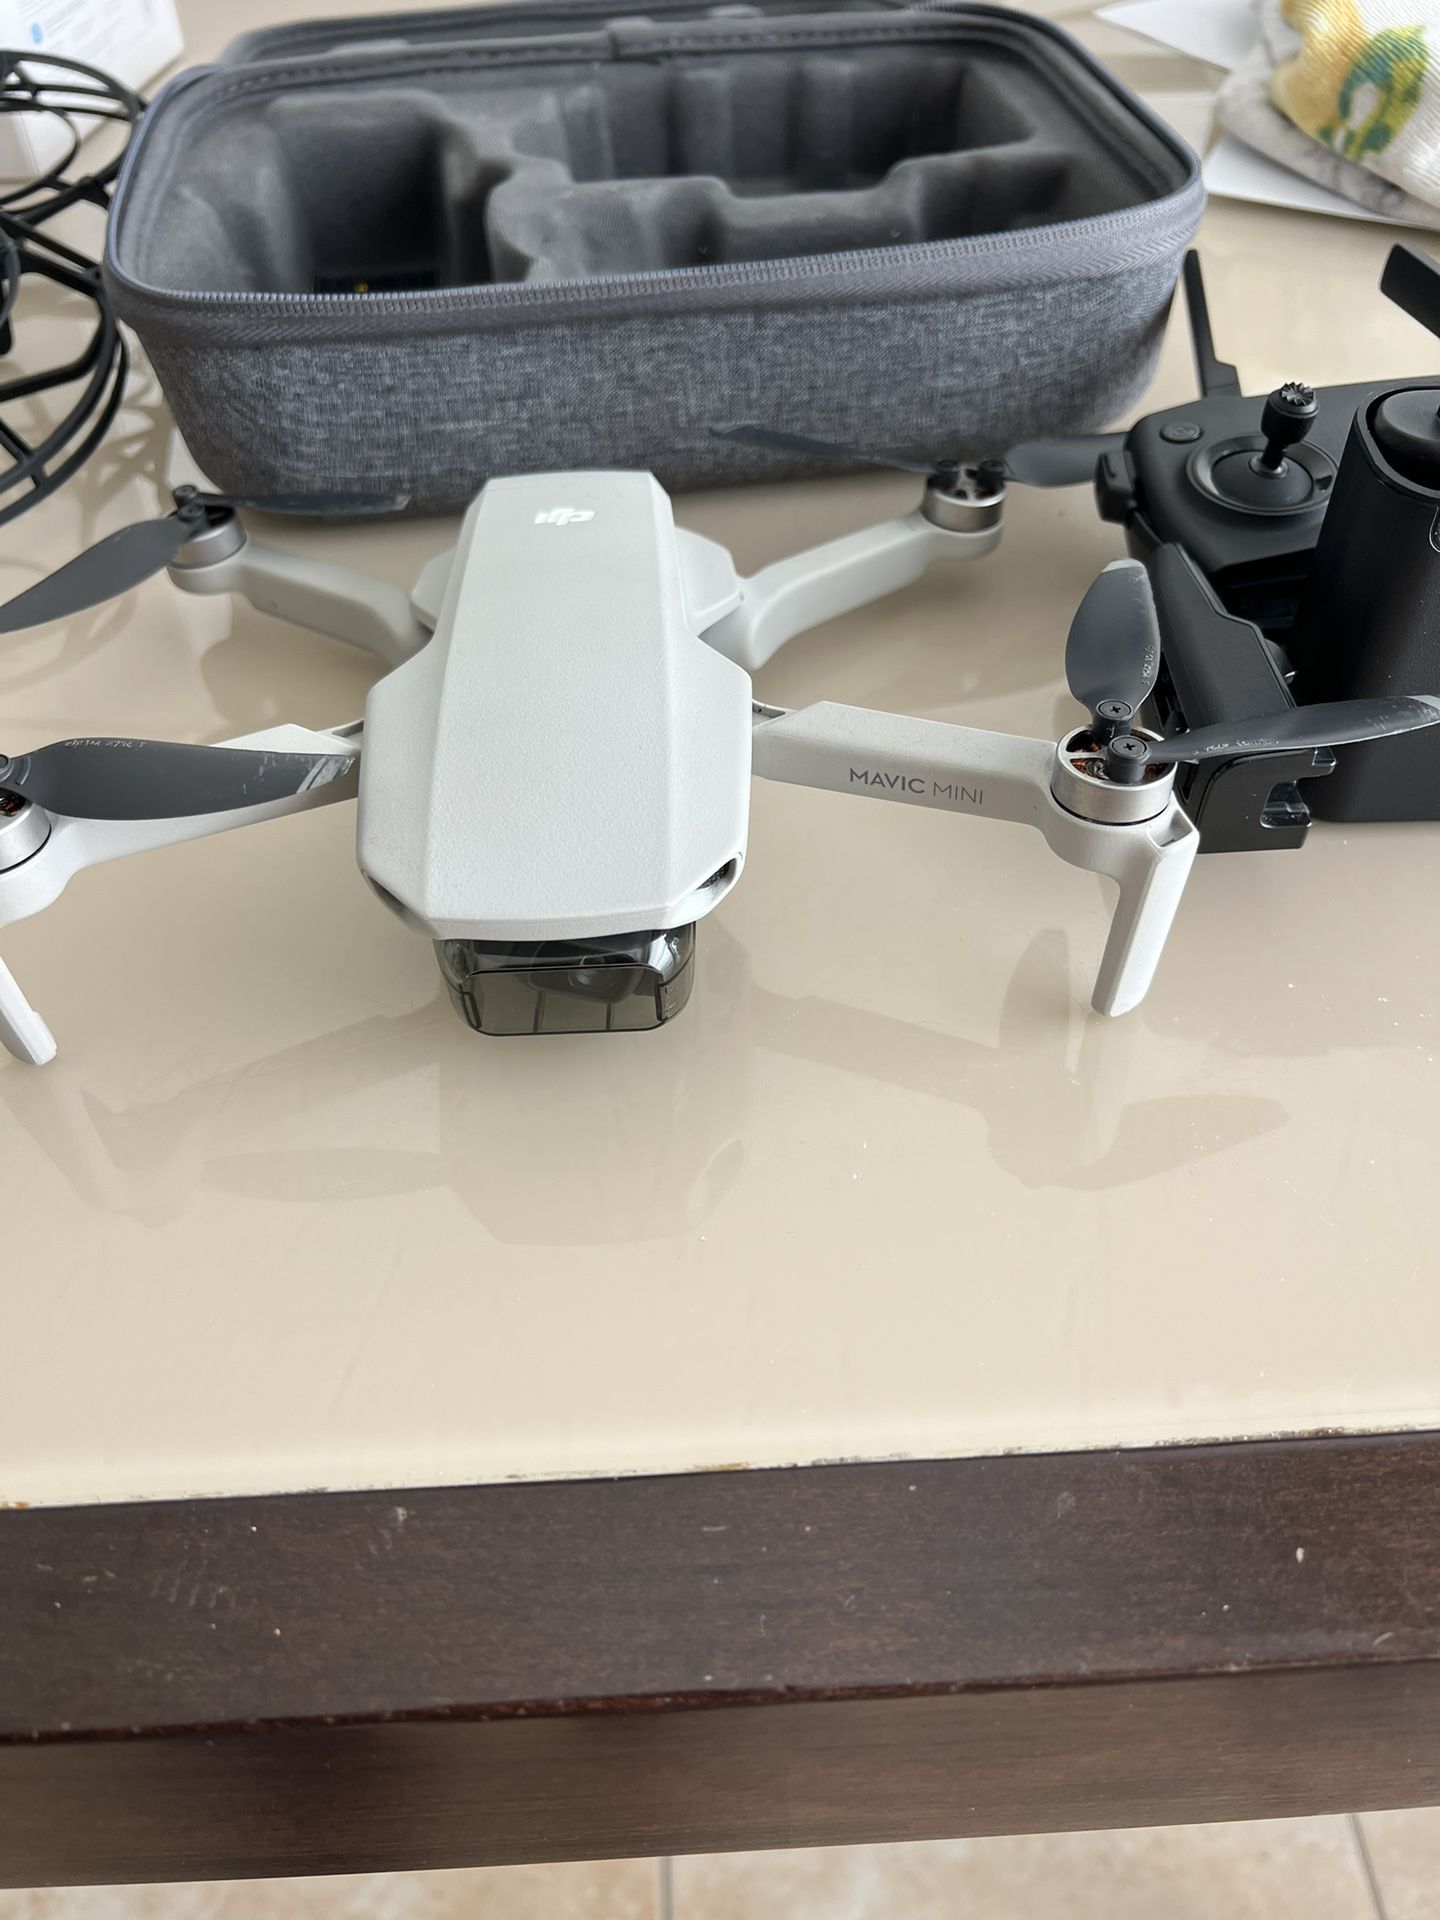 DJI MAVIC MINI WITH THE INFAMOUS FLY MORE COMBO WITH BOX,3 BATTERIES, DRONE, REMOTE, BOX AND ACCESSORIES